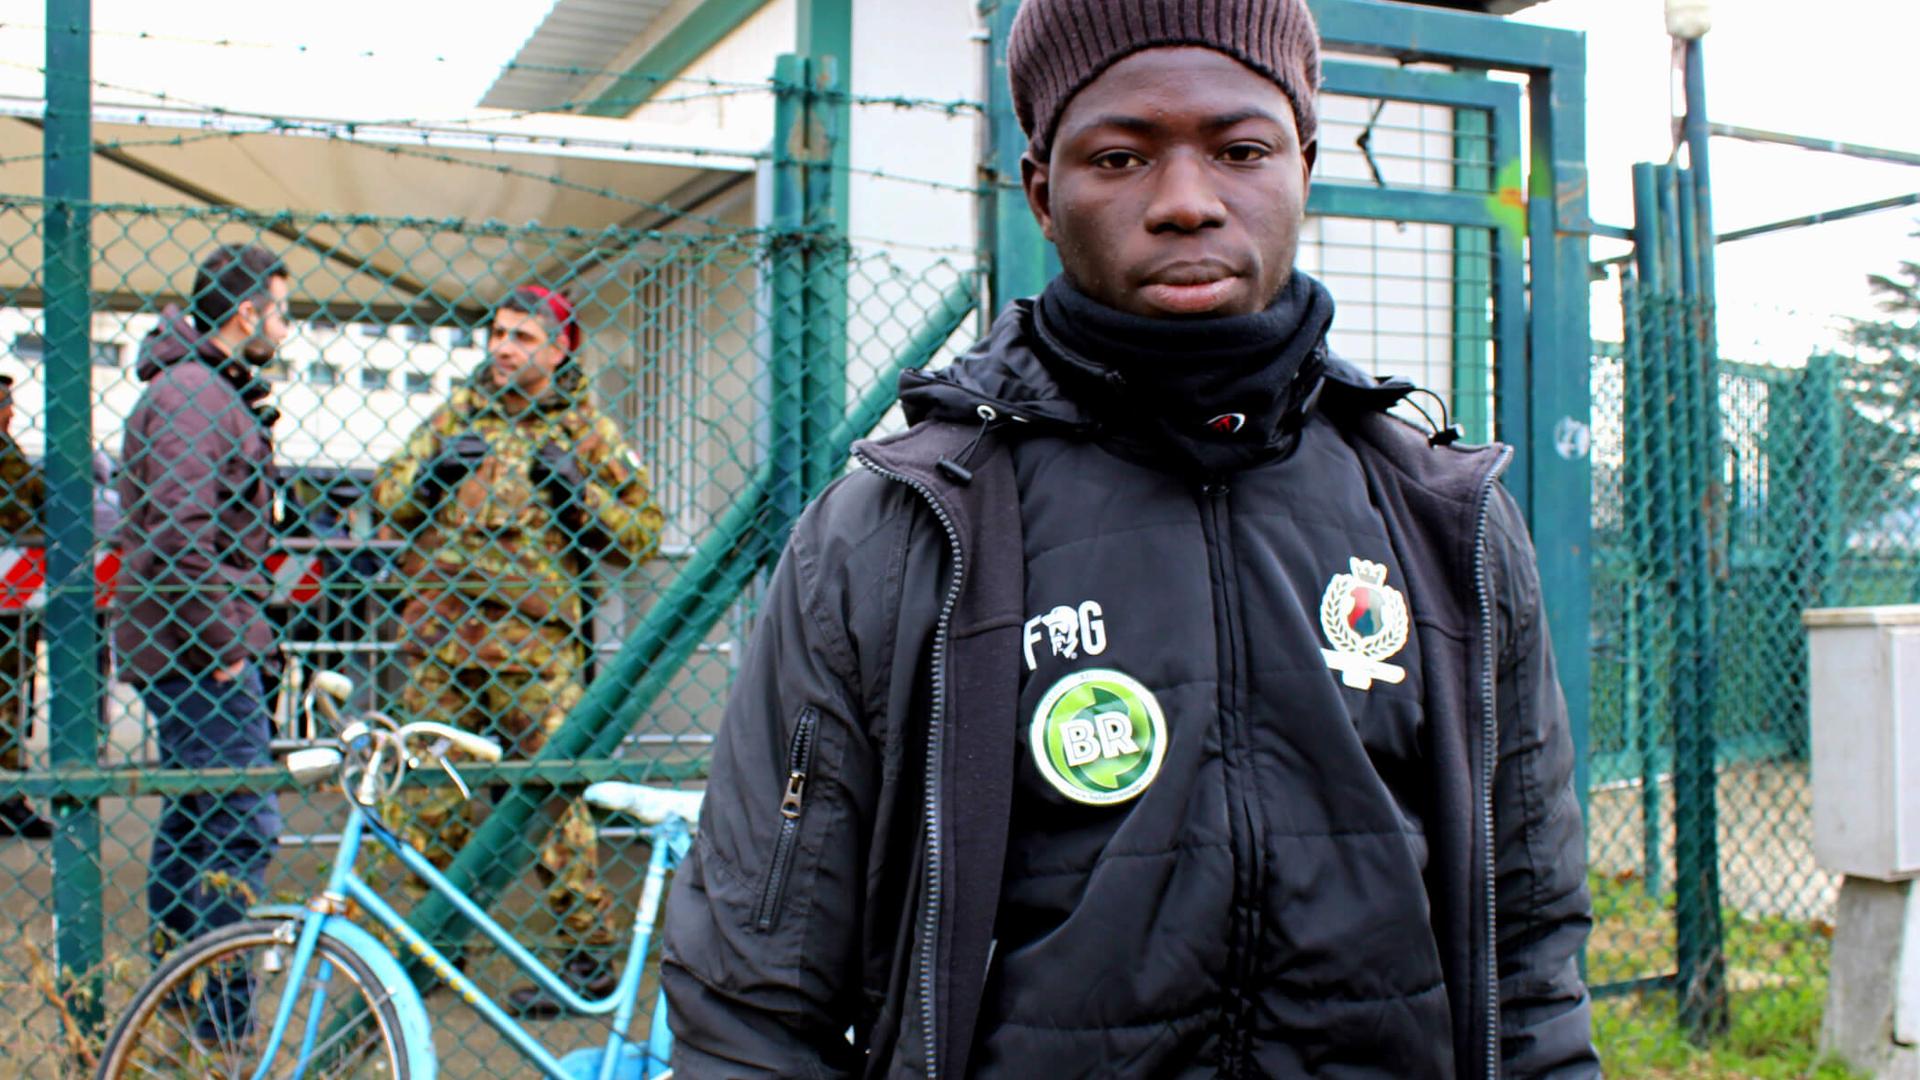 A young African man wears a green hat and a black jacket near a fence.